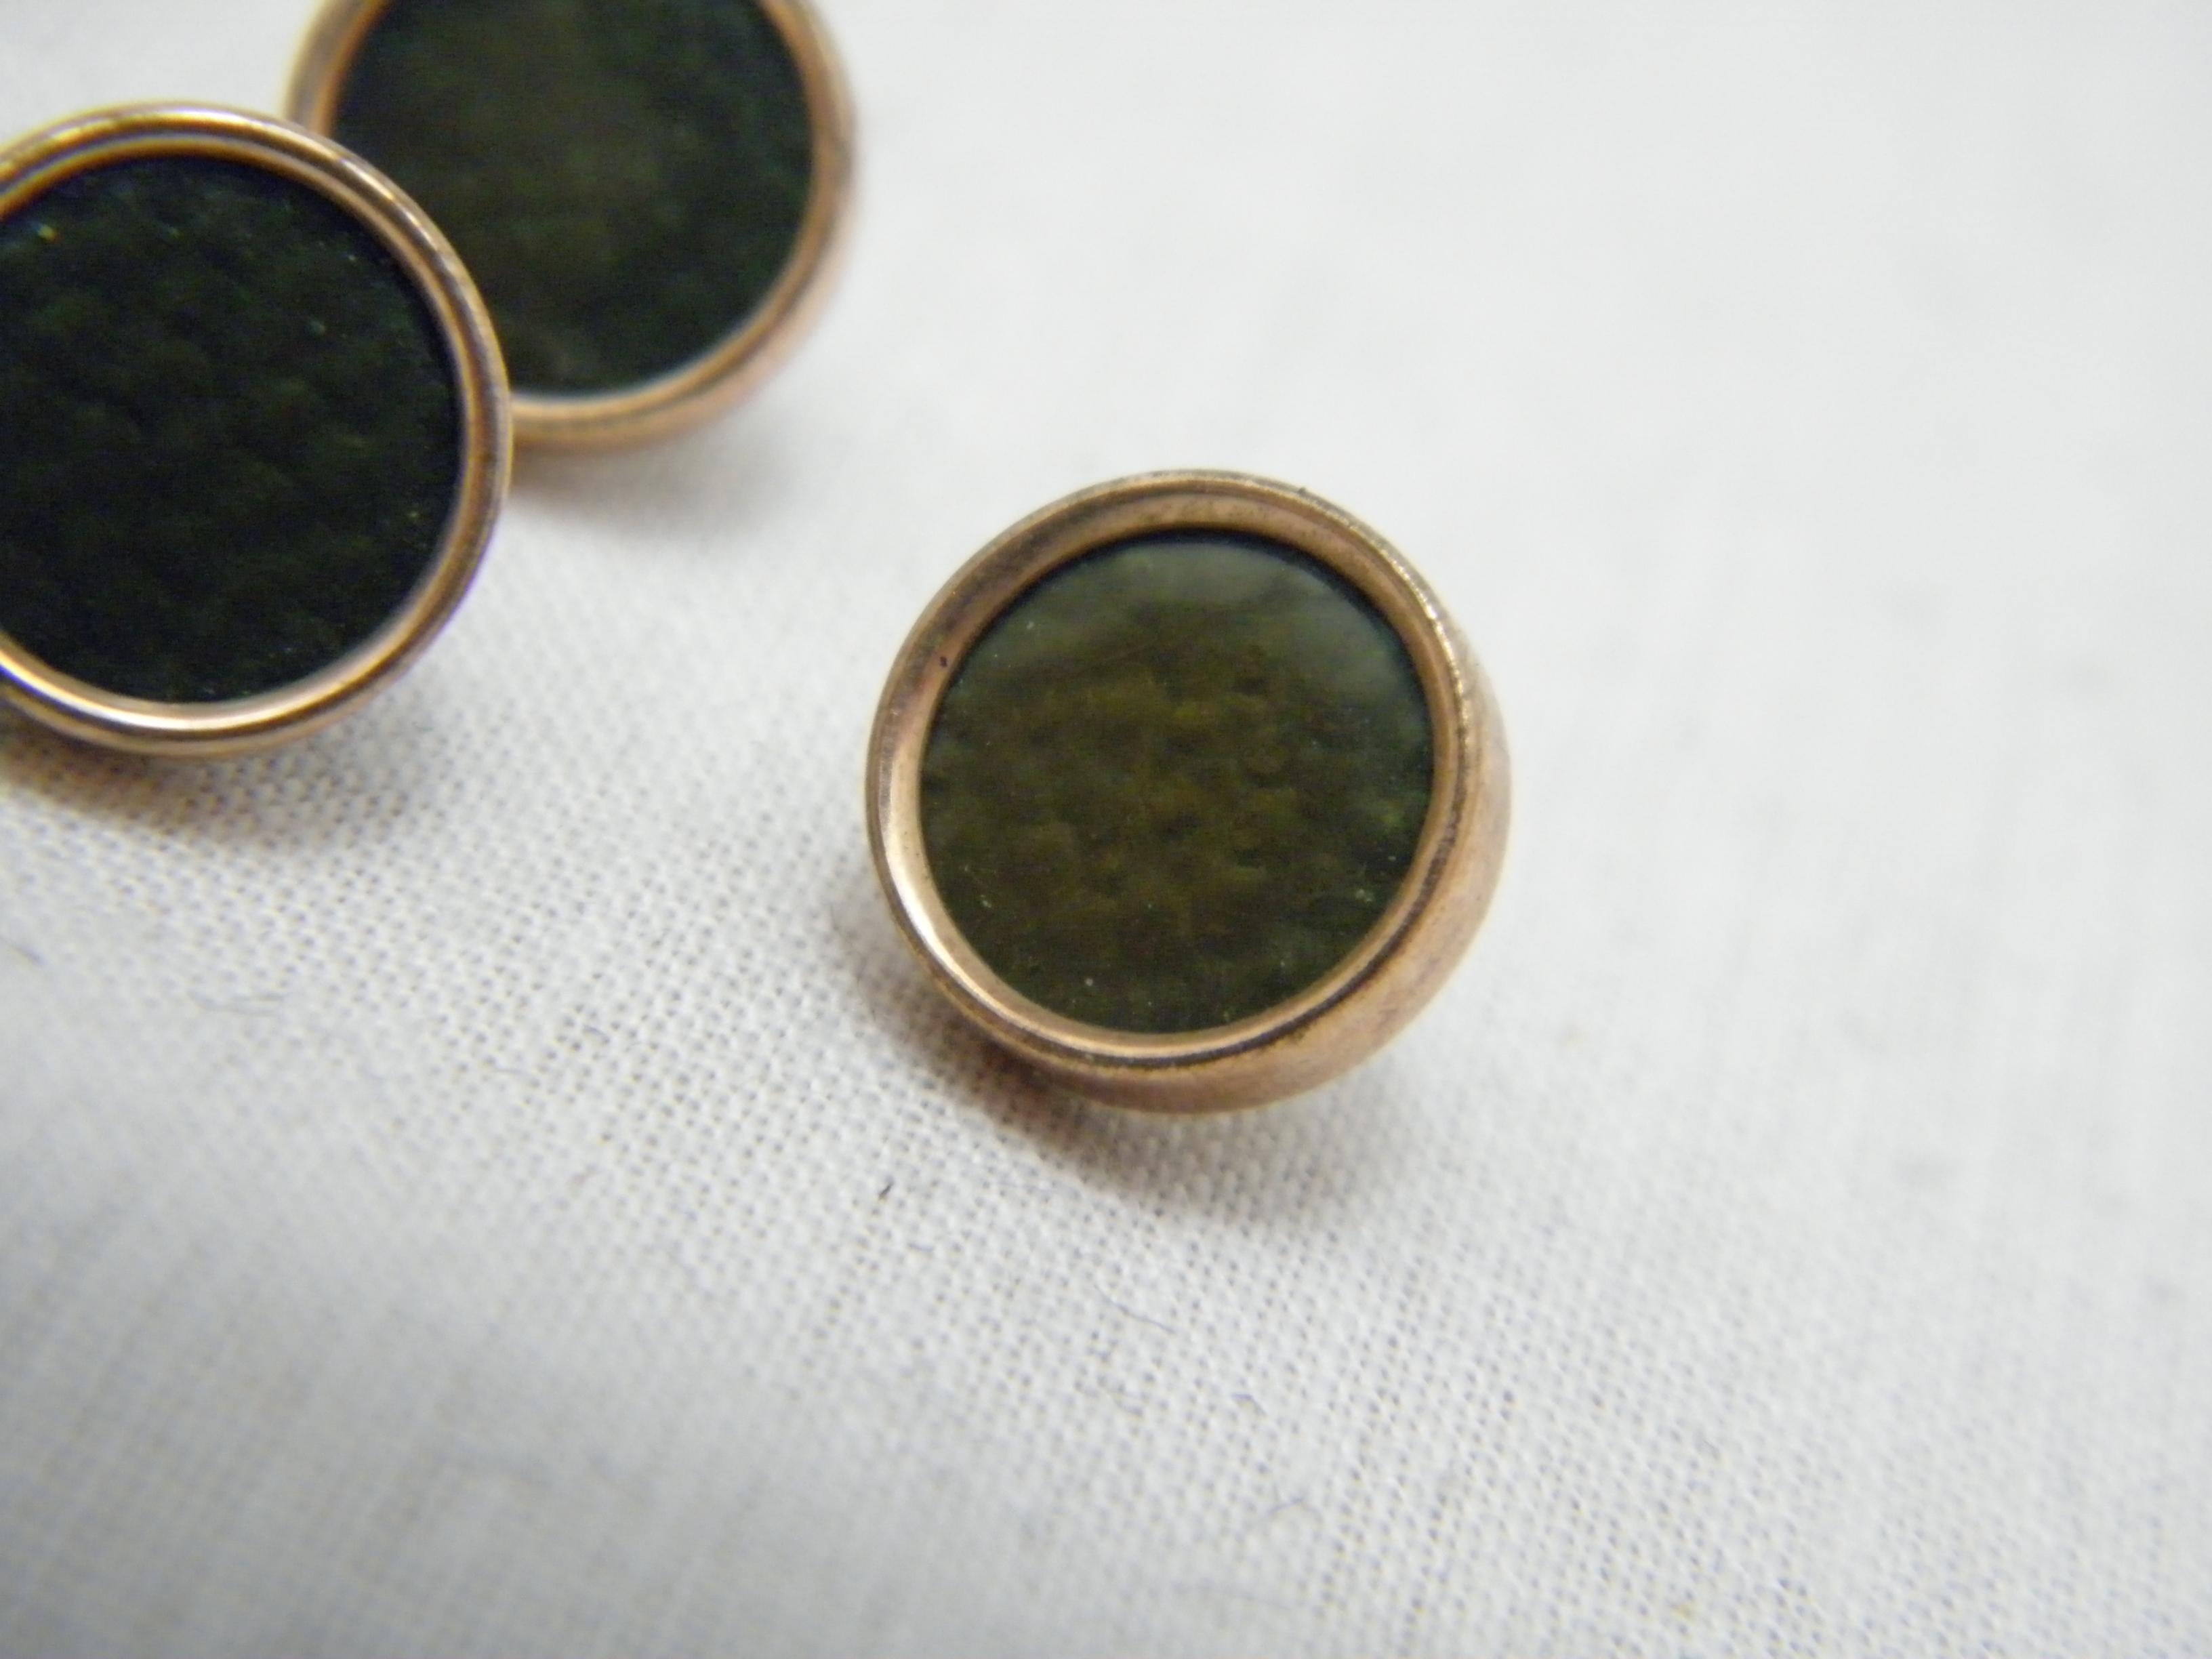 Bargain Antique 15ct Rose Gold Green Weave Shirt Studs Buttons c1880 625 Purity In Good Condition For Sale In Camelford, GB